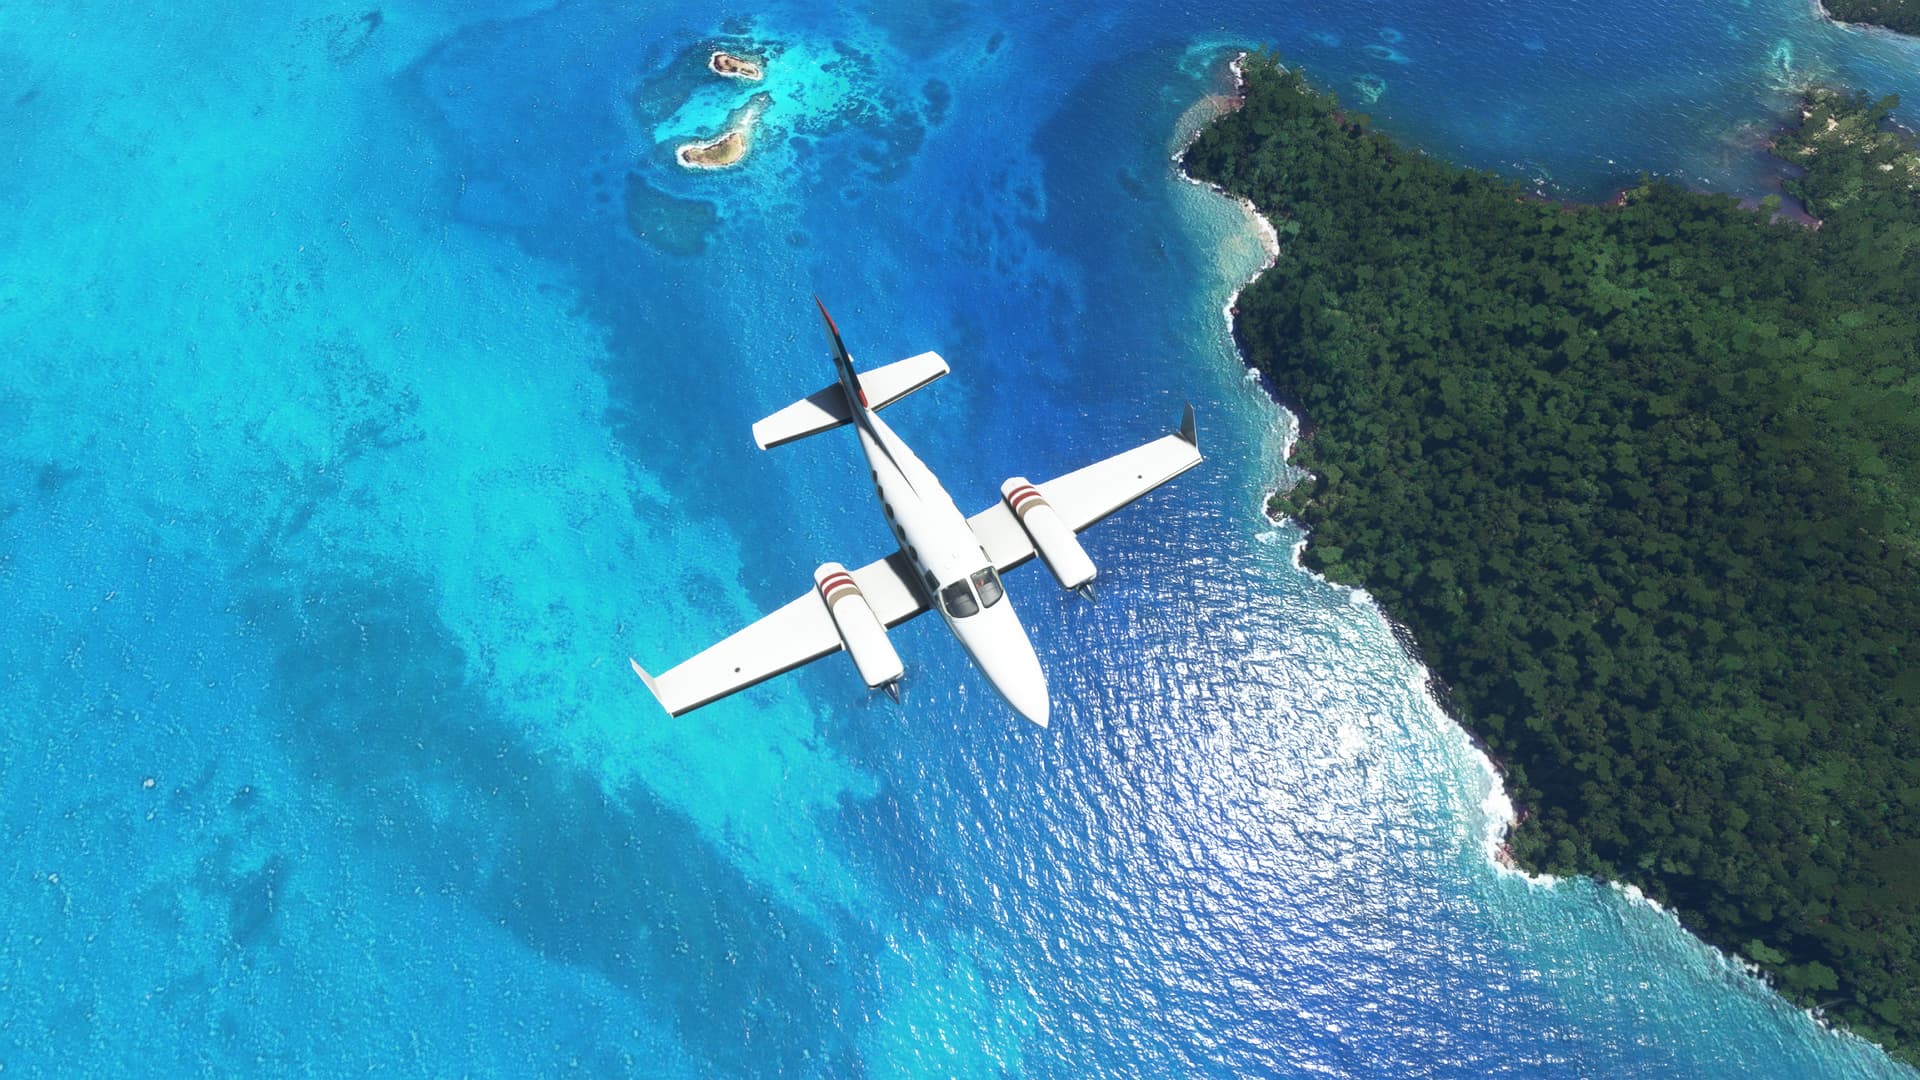 Top down view of a twin-engine GA plane flying over a shoreline. There are green trees visible on the landmass, and the water is bright blue.